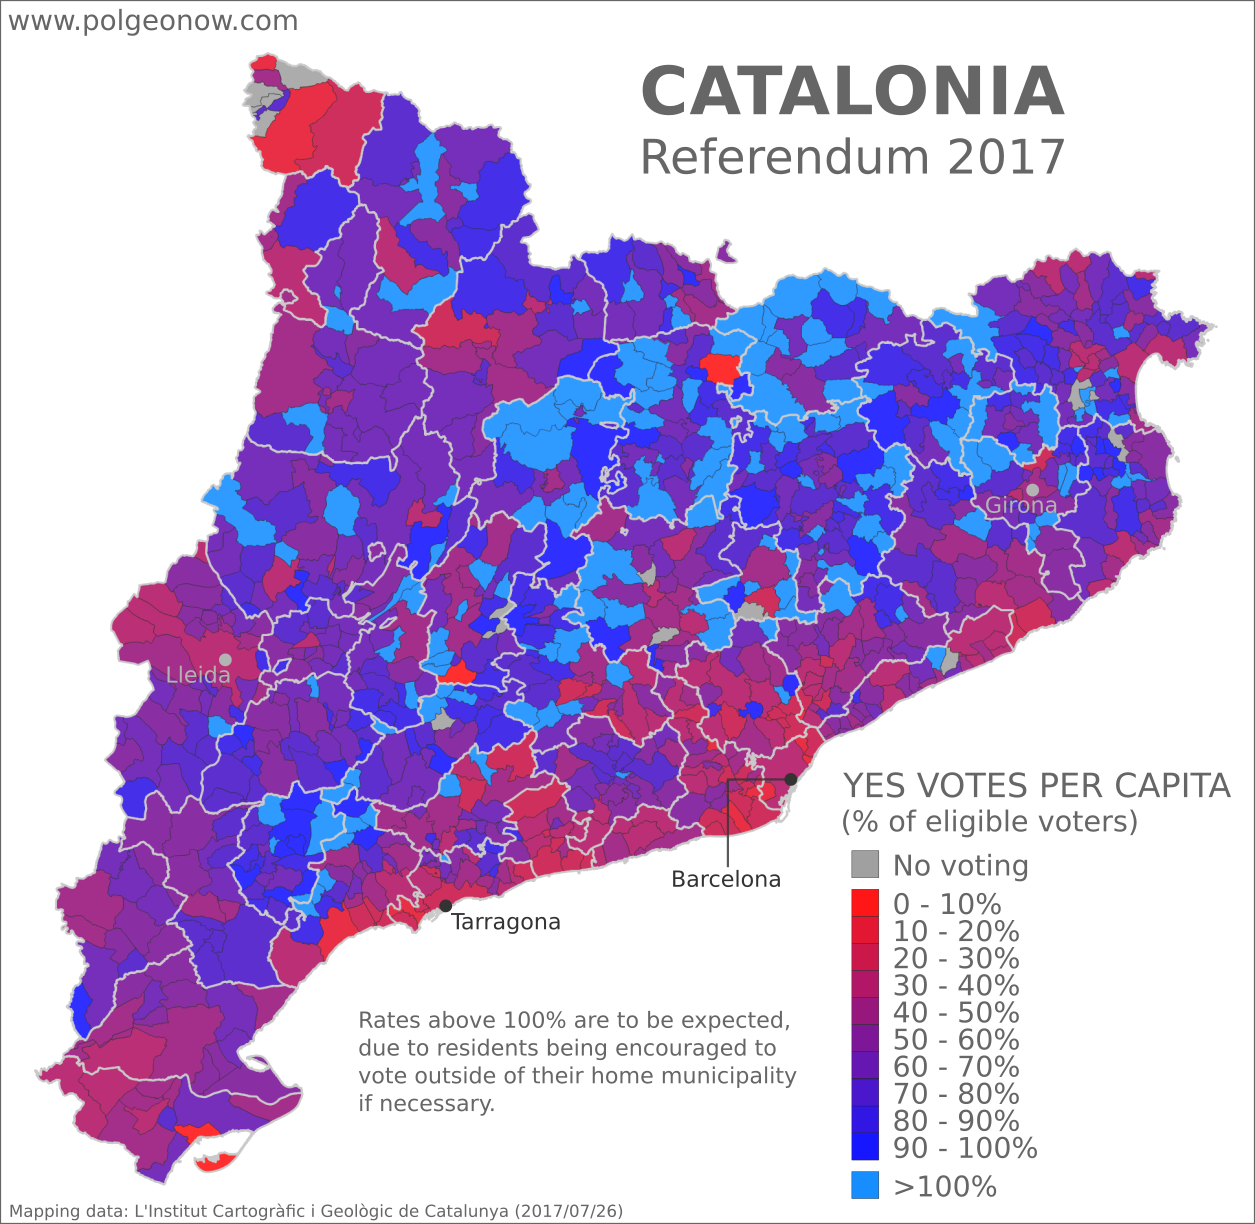 Catalan referendum 2017 map: Detailed, municipality-level map of results in Catalonia's disputed October 2017 referendum on independence from Spain, showing per capita YES votes in favor of independence as a proportion of total eligible voter population in each municipality. Boundaries of comarques (comarcas) shown. Labels cities of Barcelona, Tarragona, Lleida, and Girona. Colorblind accessible.